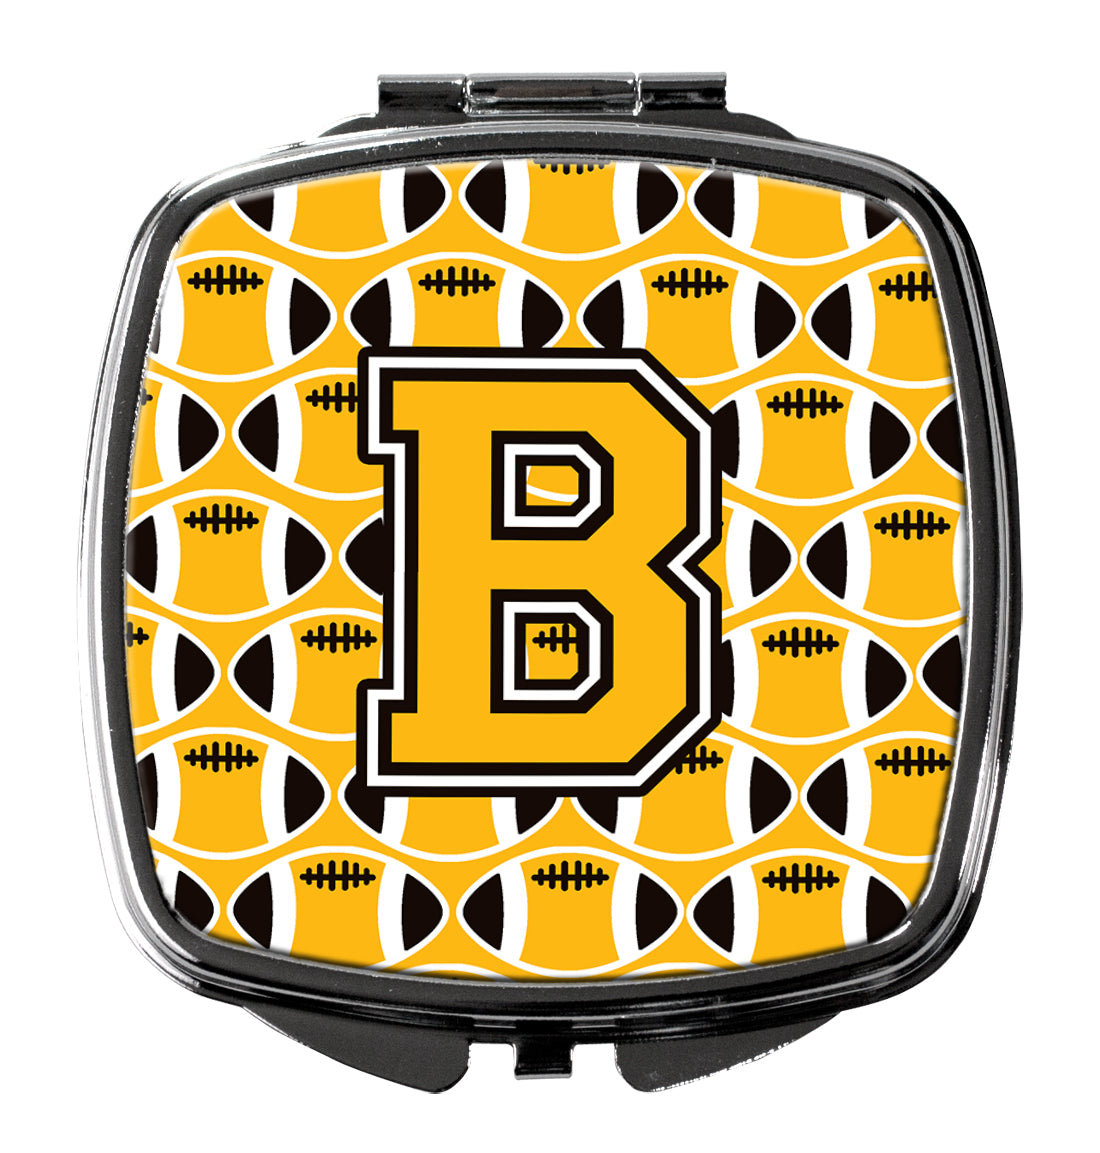 Letter B Football Black, Old Gold and White Compact Mirror CJ1080-BSCM